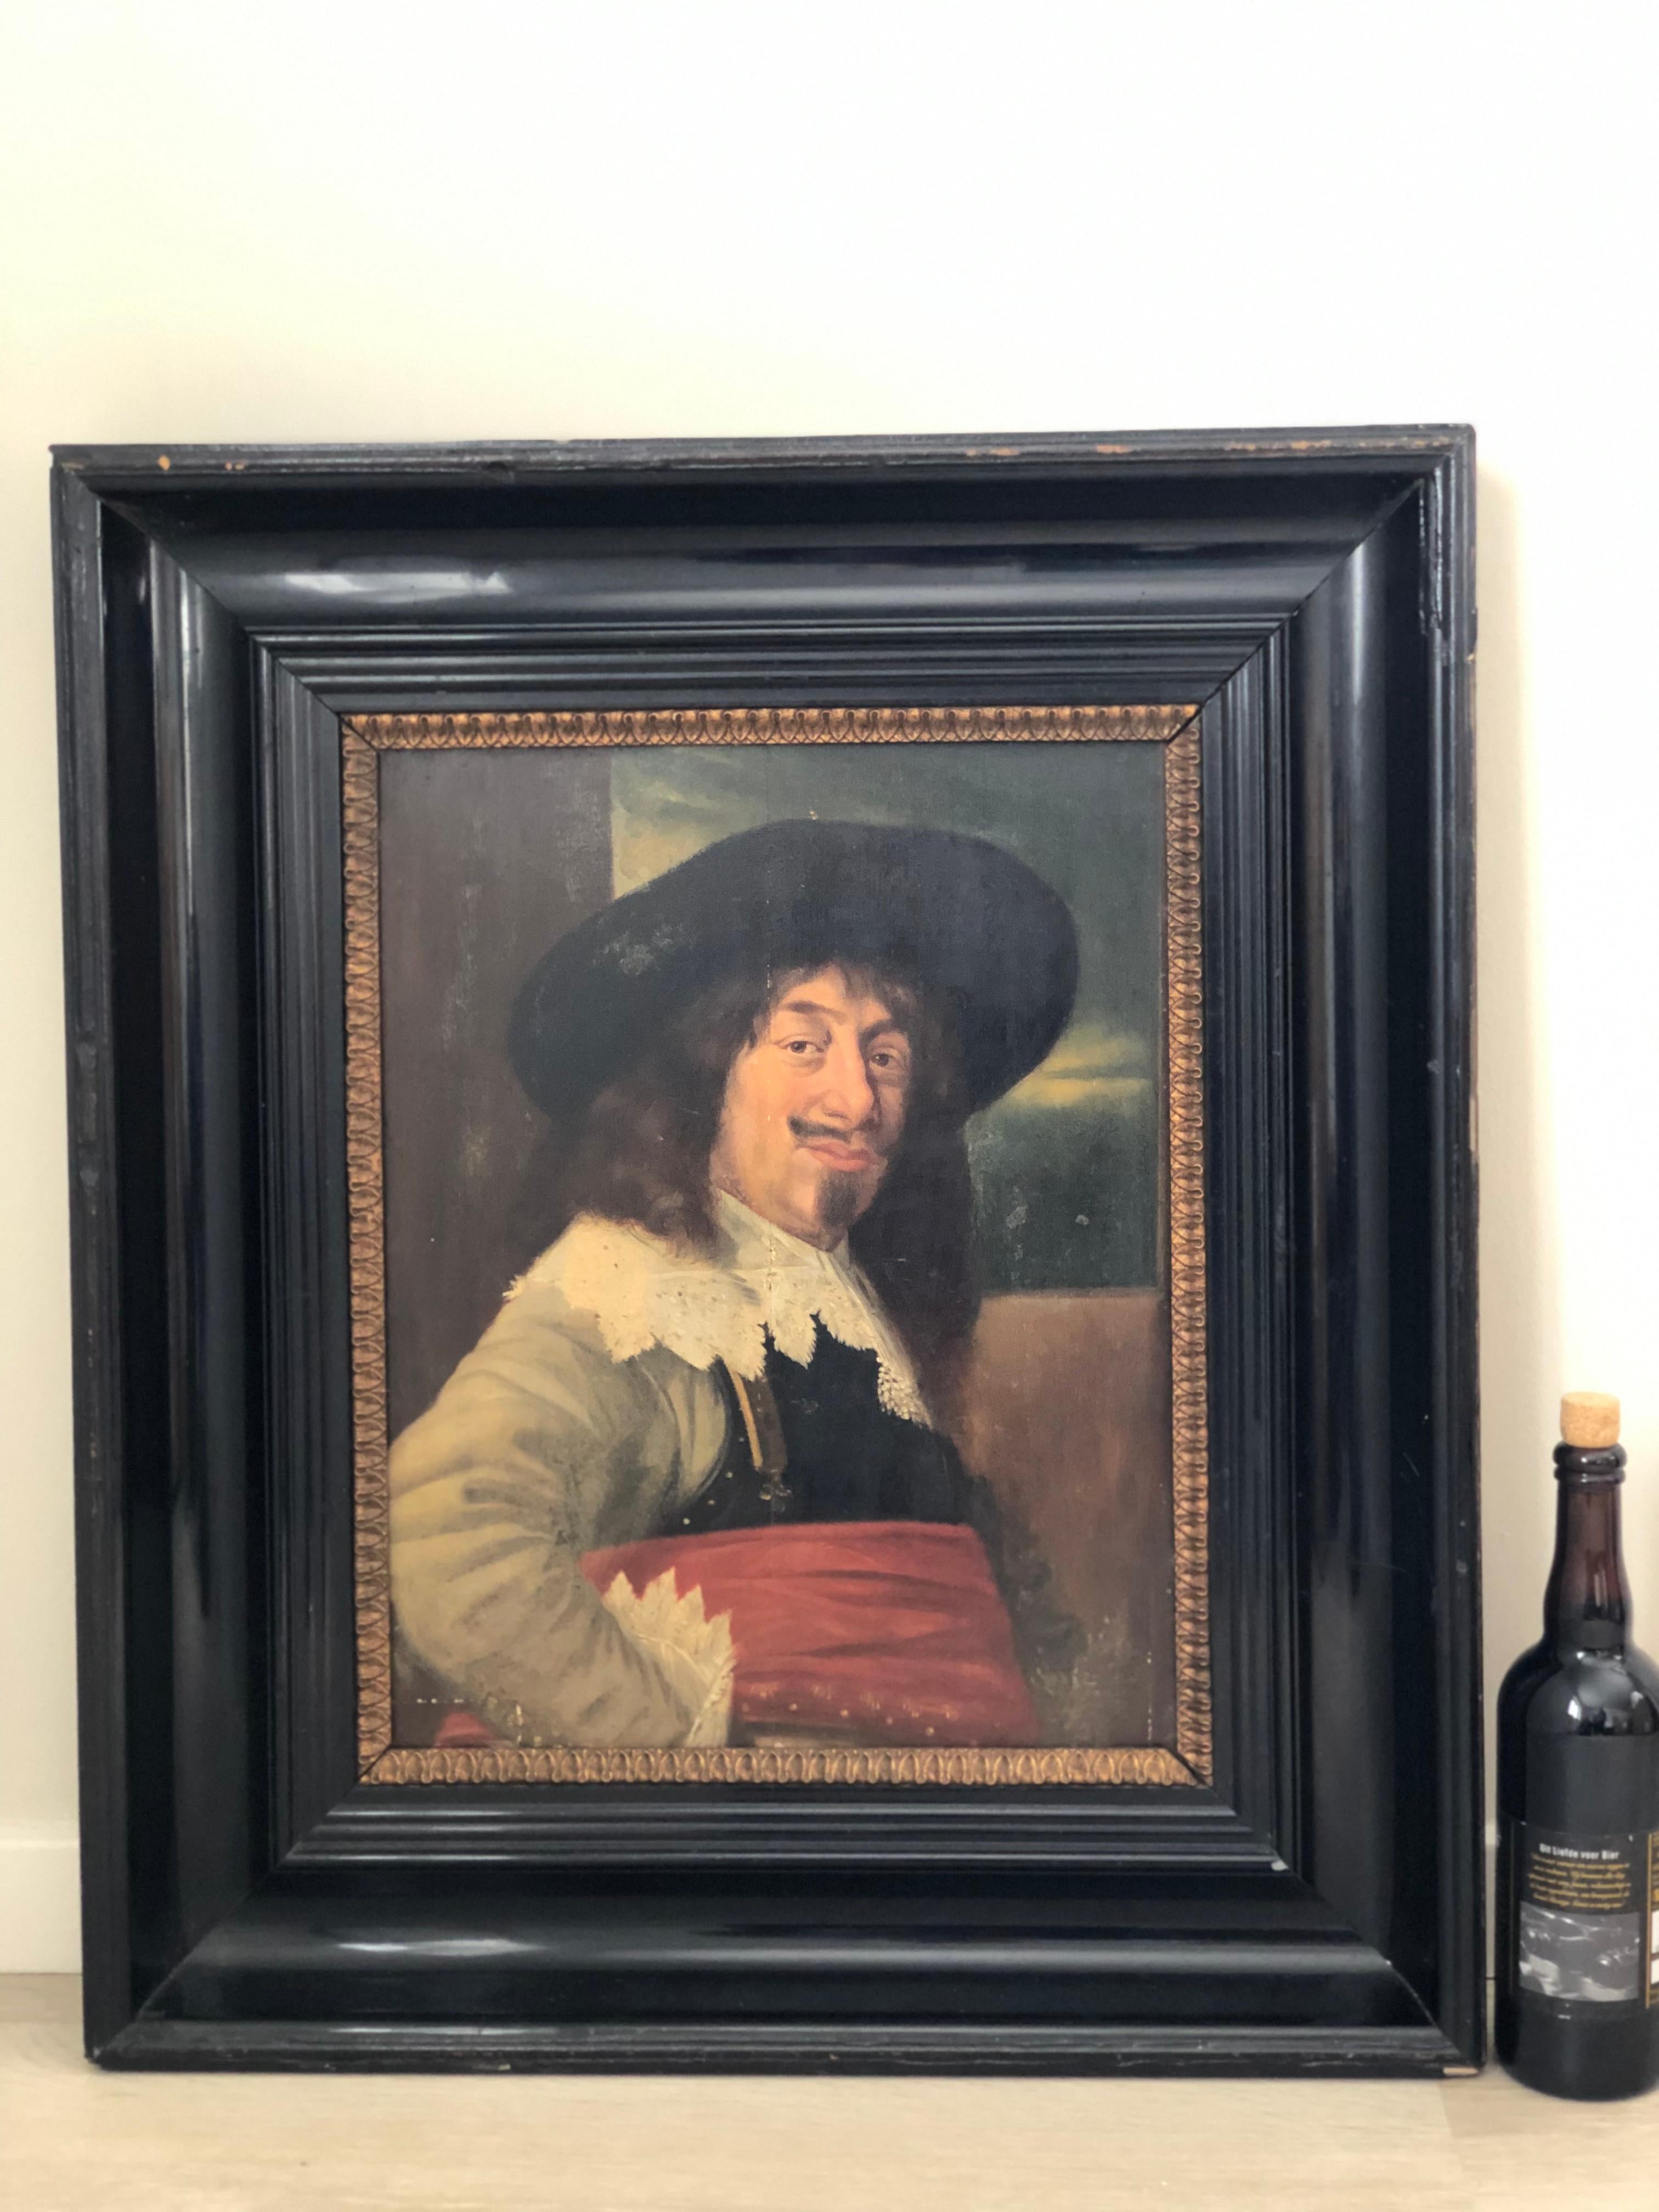 Wood Late 19th Century Oil Painting of a Noble Man from the Dutch Golden Age Era For Sale